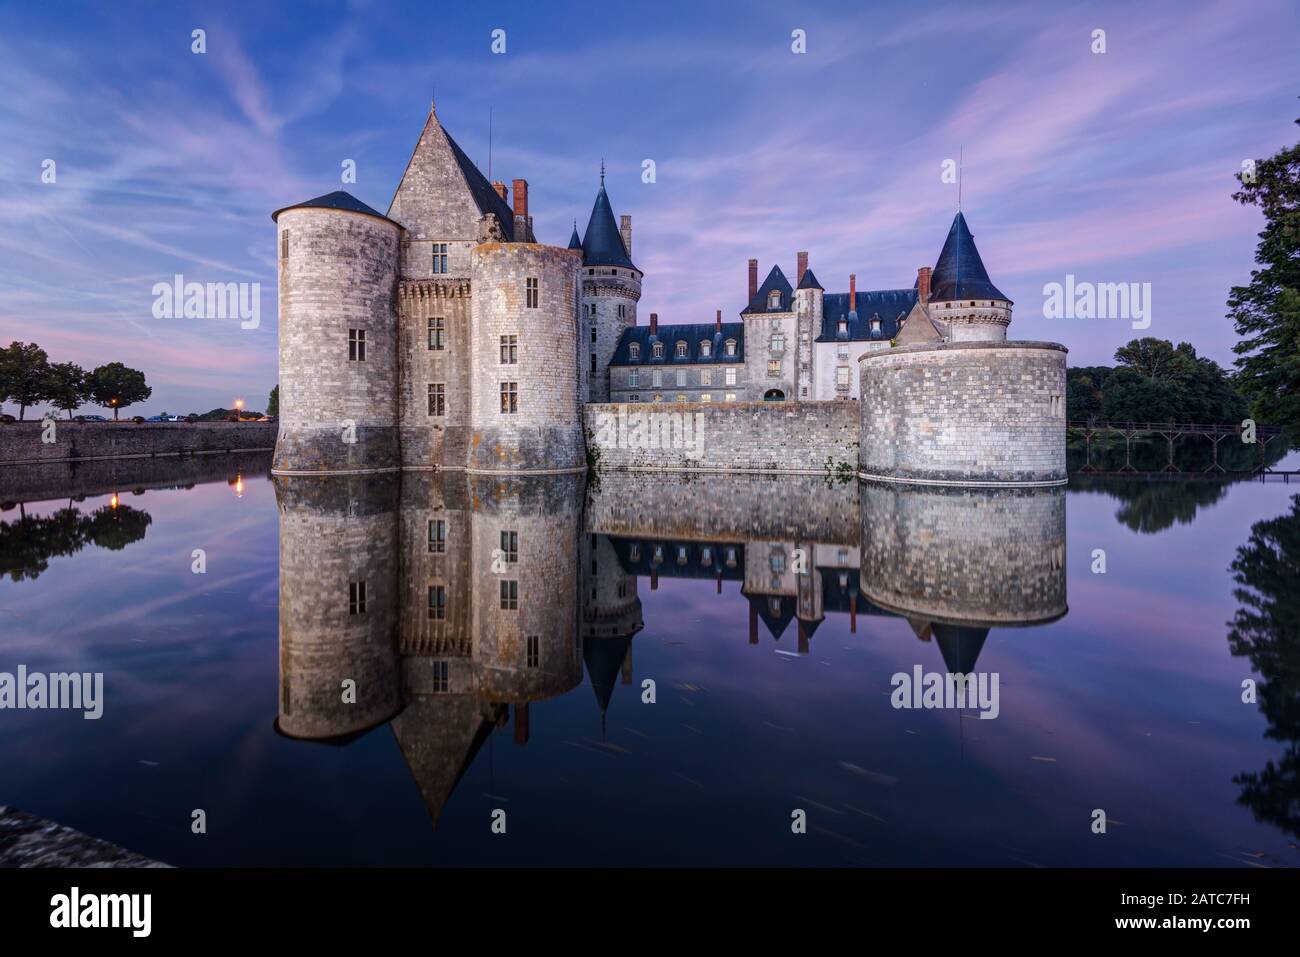 The chateau of Sully-sur-Loire at night, France. This castle is located in the Loire Valley, dates from the 14th century and is a prime example of med Stock Photo